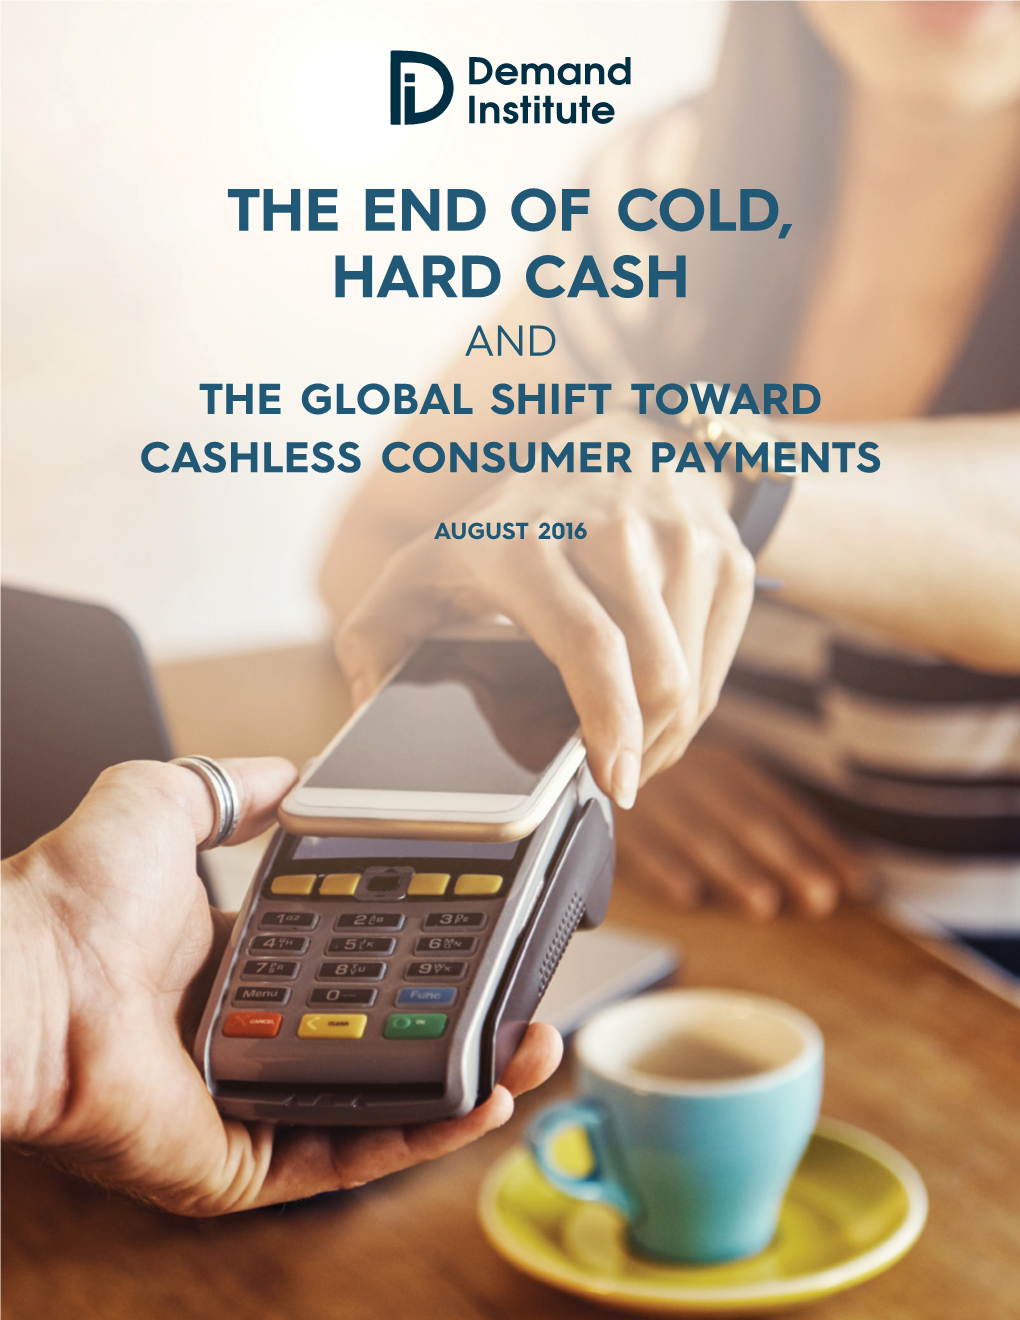 The End of Cold, Hard Cash and the Global Shift Toward Cashless Consumer Payments